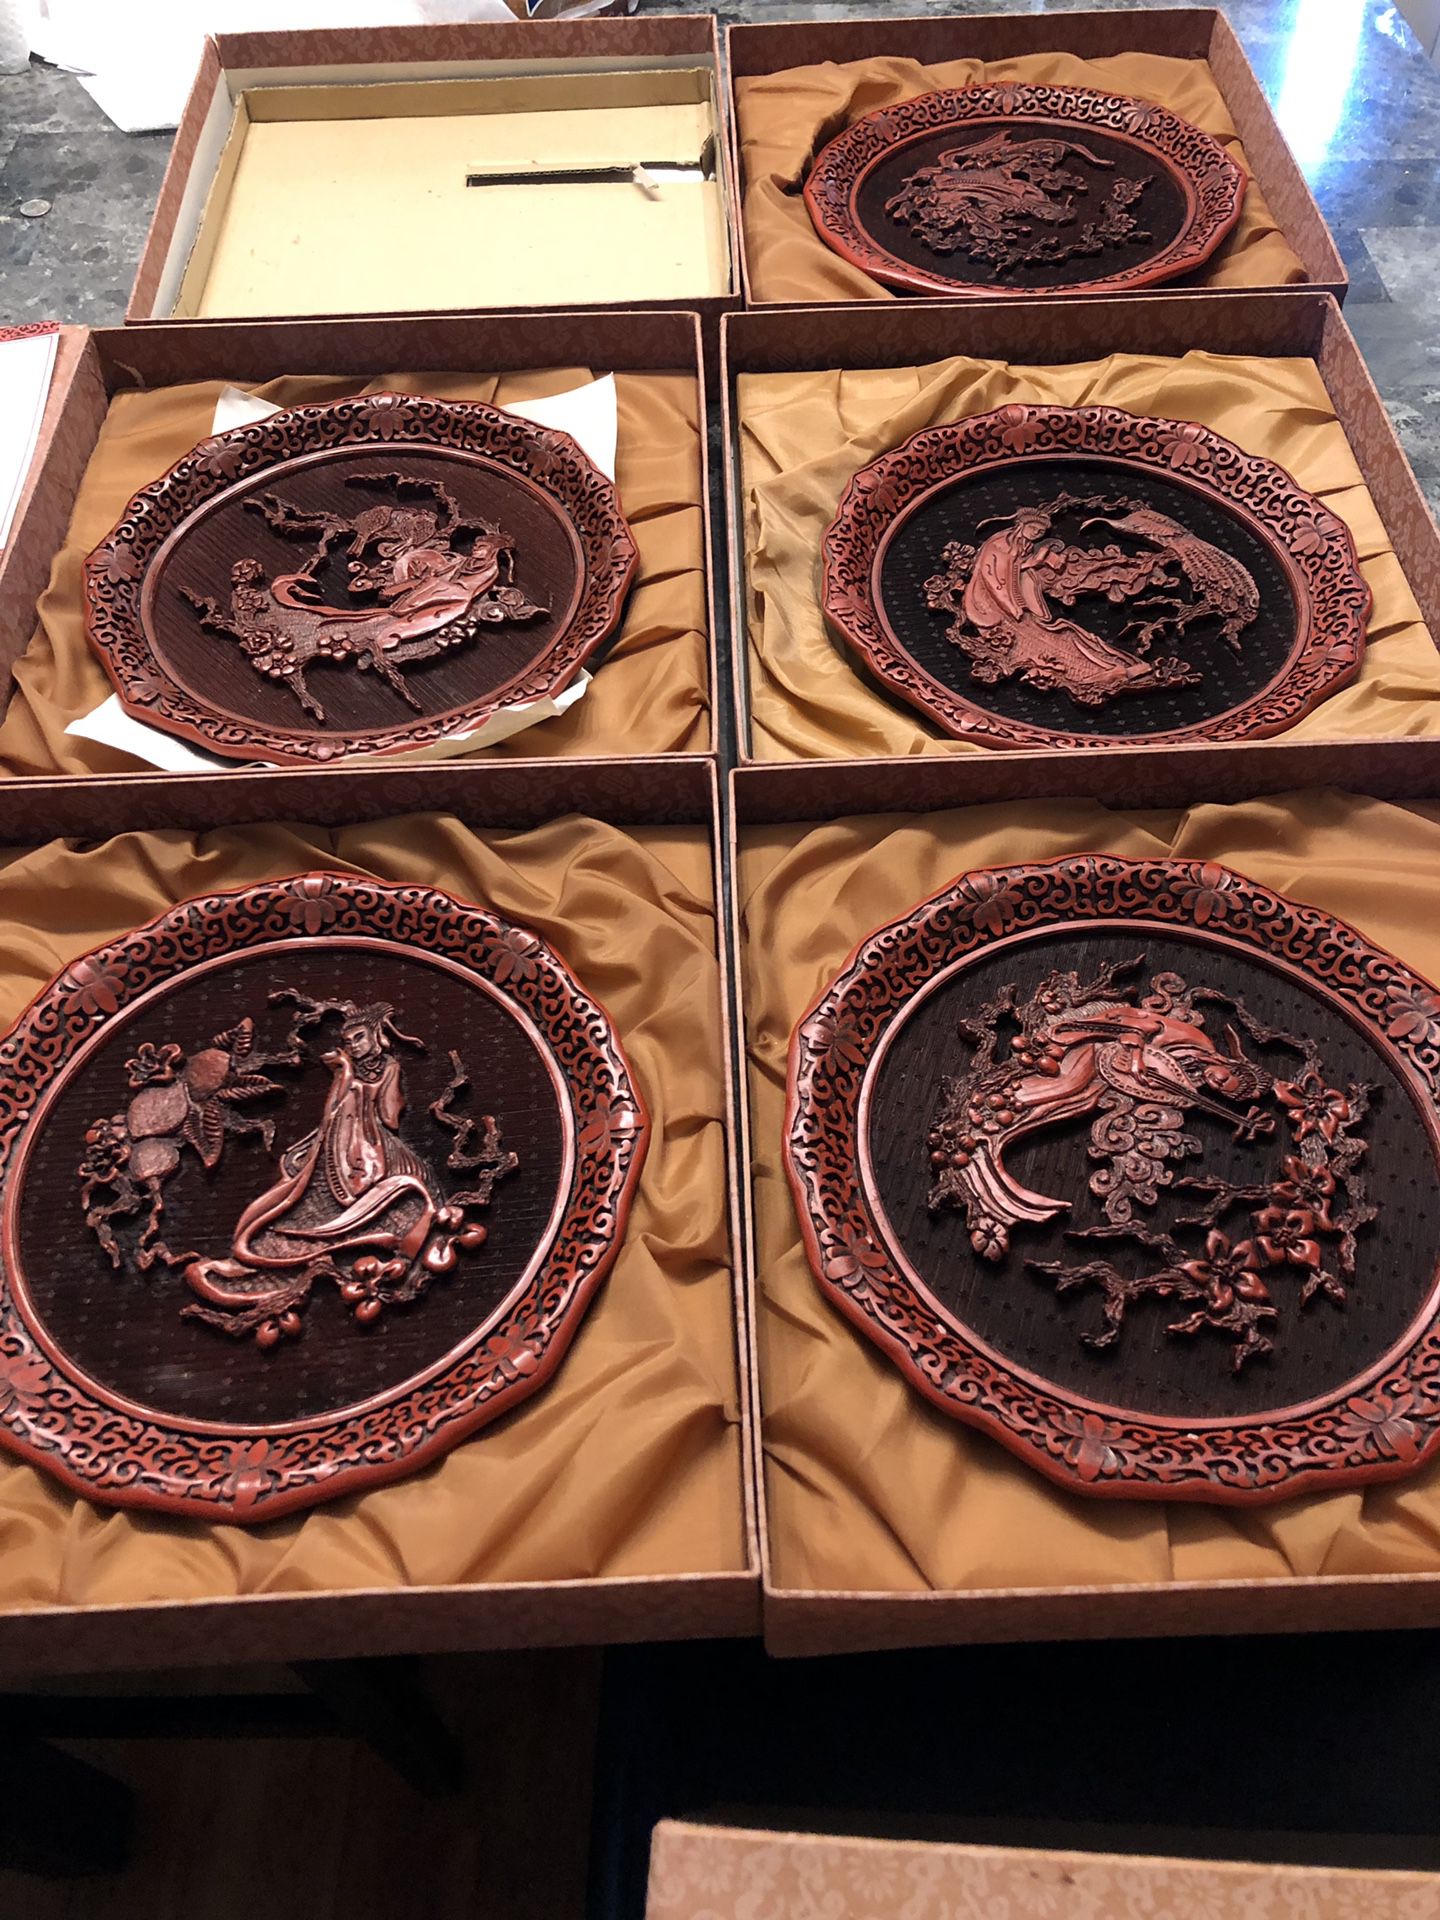 The five perceptions of weo cho decorative plates